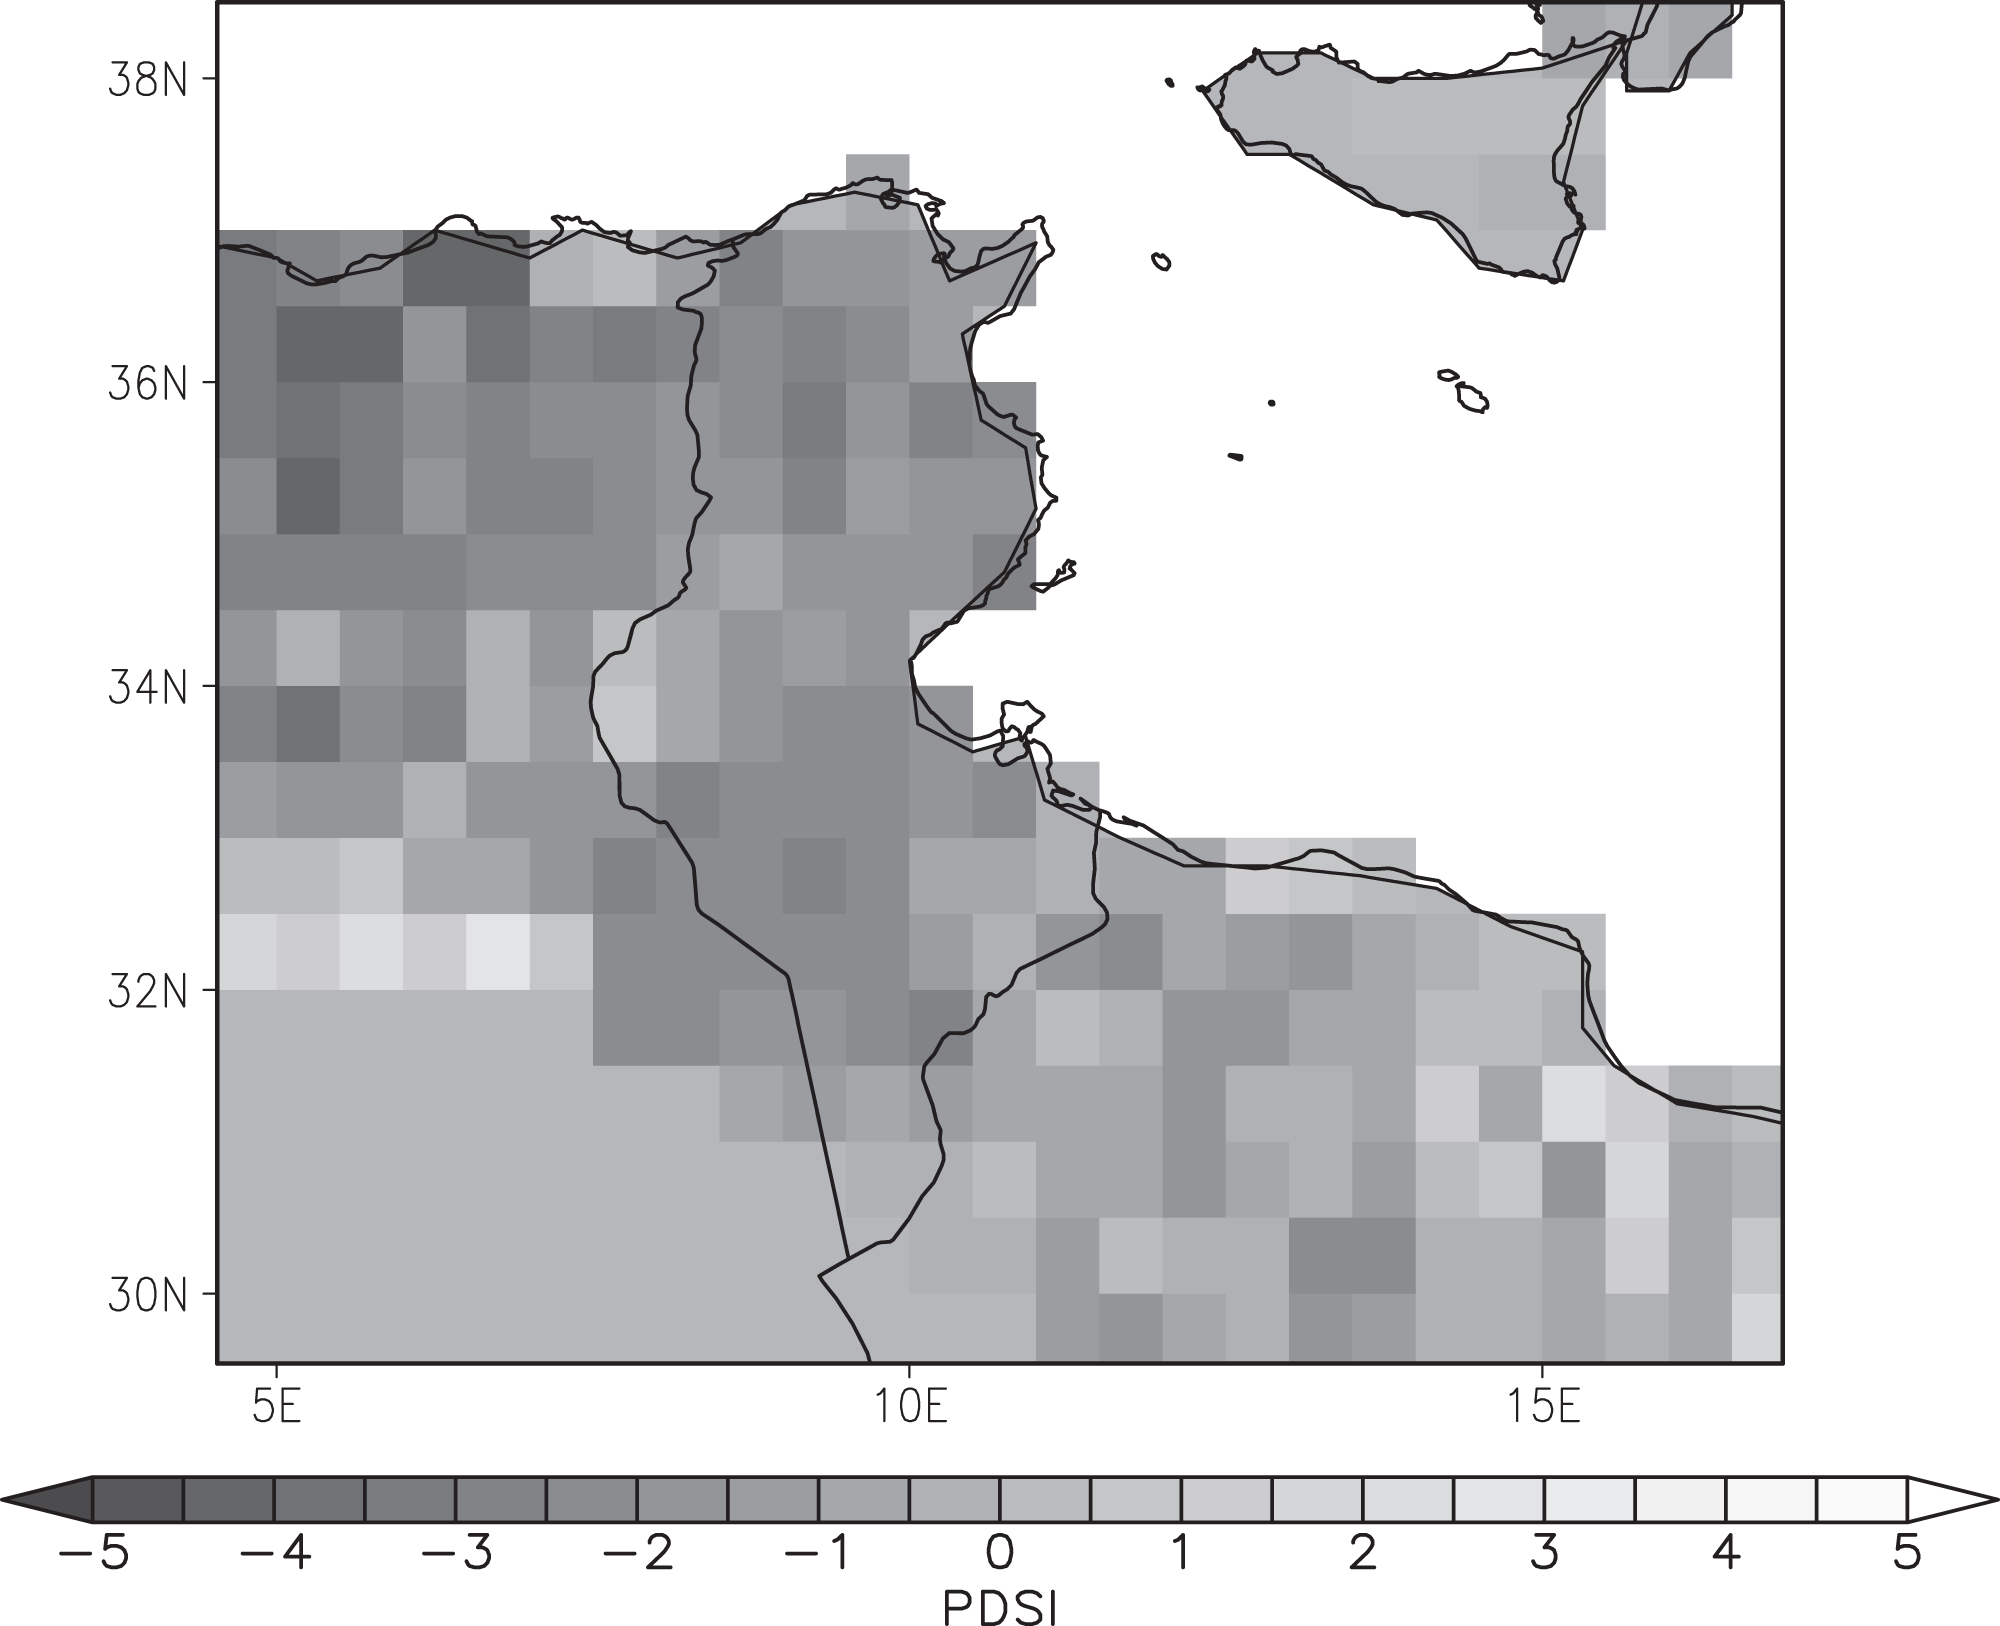 Figure 3: A map shows the extent of drought in Ifriqiya from 1143 to 1149 using dendrochronological (tree ring) data, which is quantified through a metric called the Palmer Drought Severity Index.